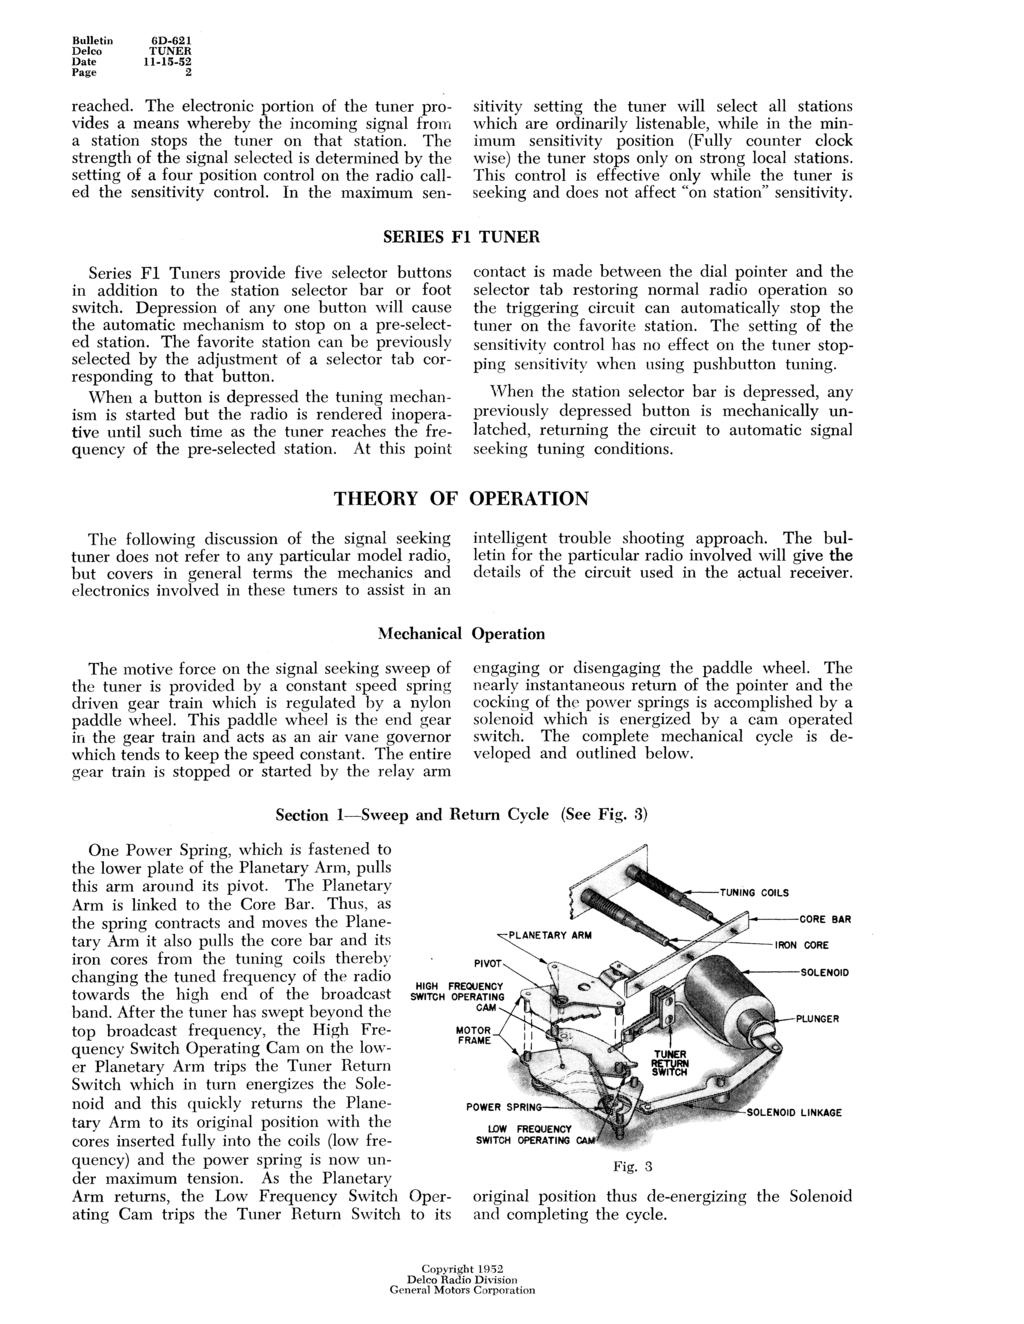 Bulletin 6D -621 Delco TUNER Date 1 1-1 5-5 2 Page 2 reached. The electronic portion of the tuner provides a means whereby the incoming signal from a station stops the tuner on that station.